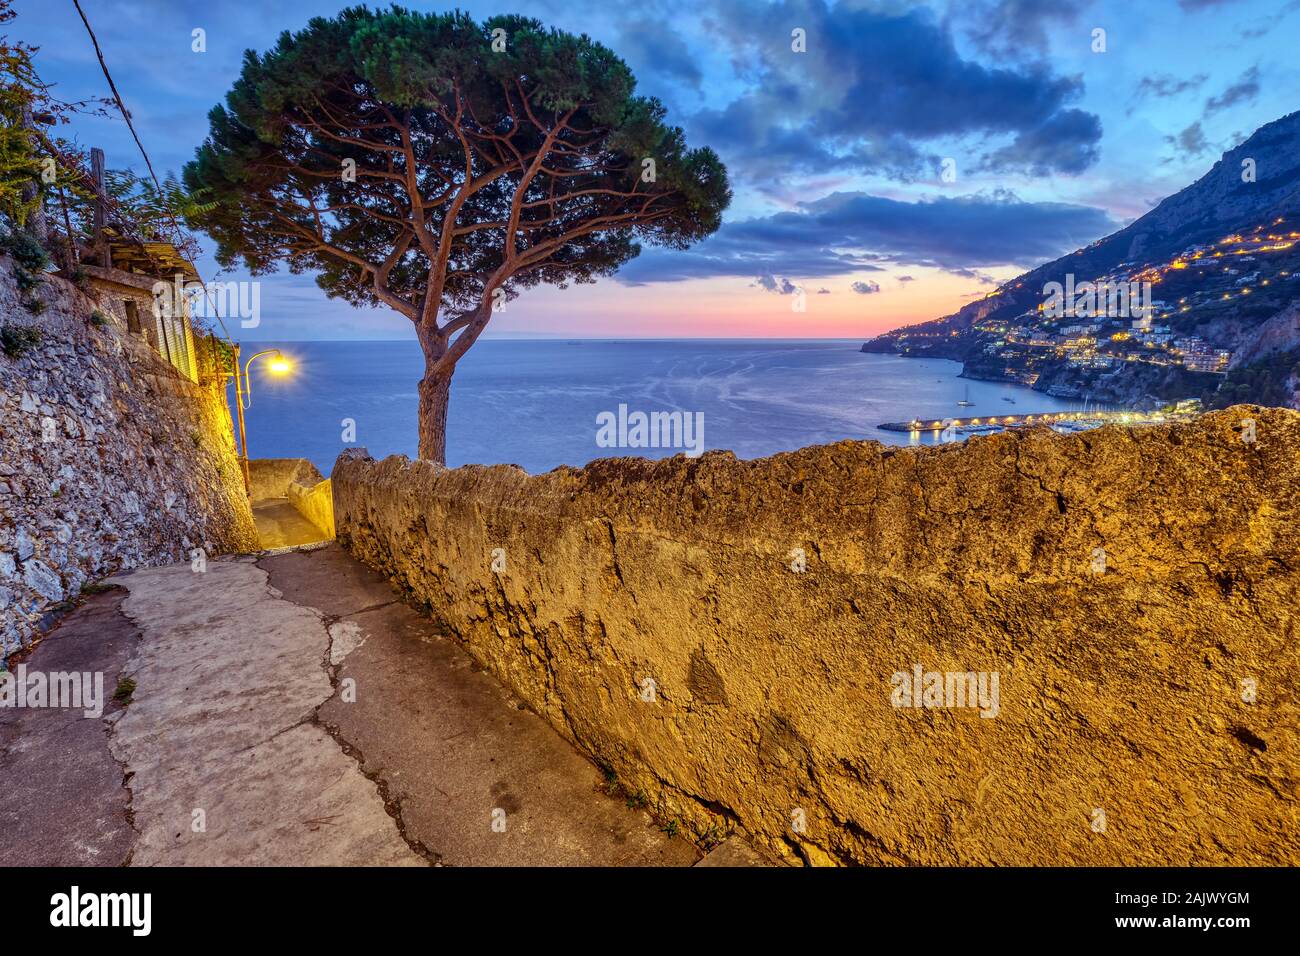 Small alleyway with a pine tree in Amalfi, Italy, at sunset Stock Photo